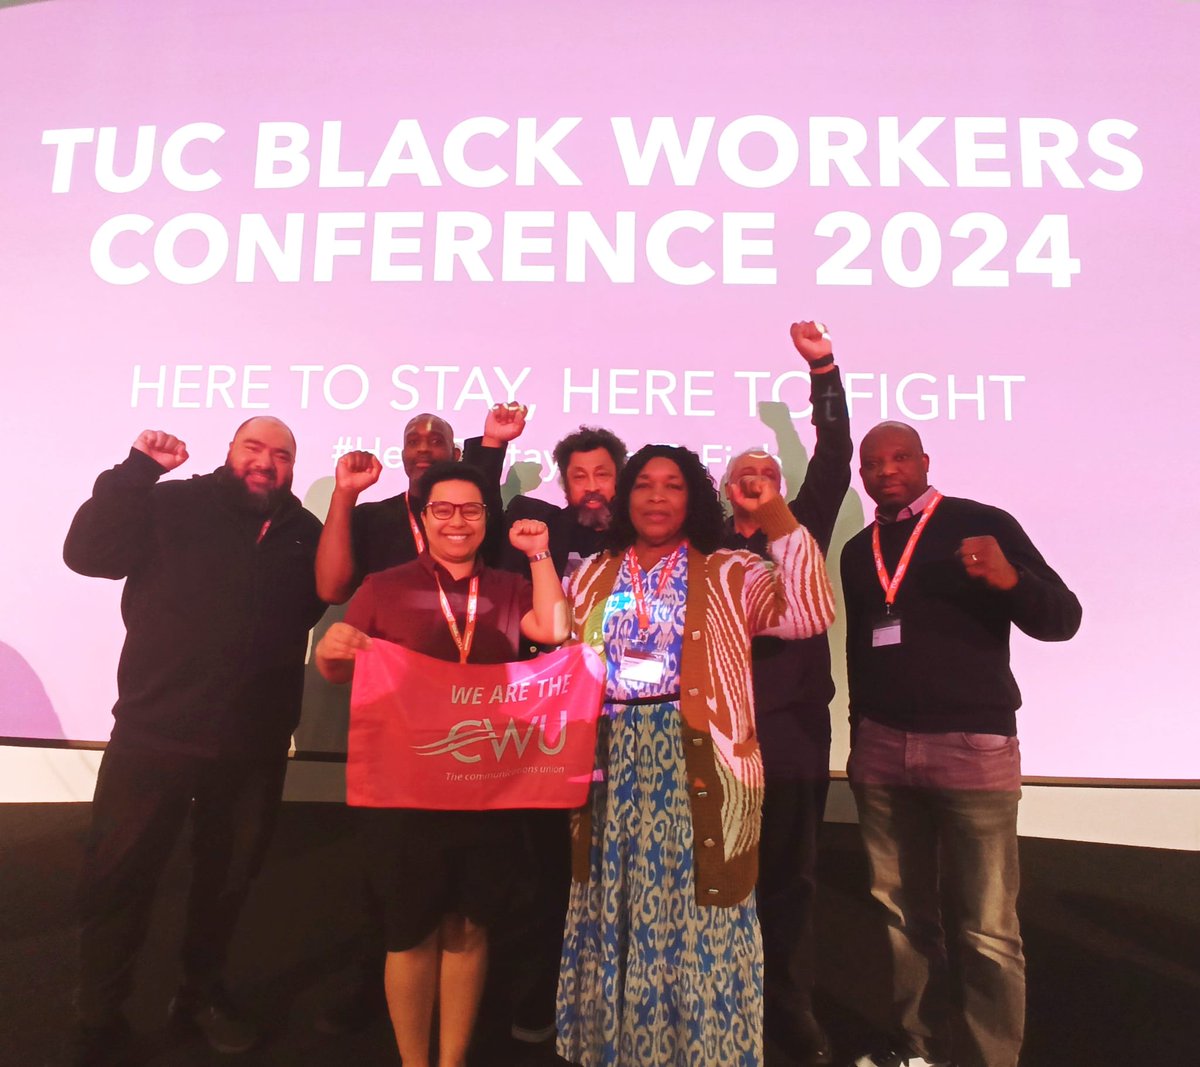 @CWUnews @DaveWardGS 
#CWUandProud 
CWU delegates and visitors at #heretostayheretofight TUC Black Workers Conference ✊🏾✊🏾